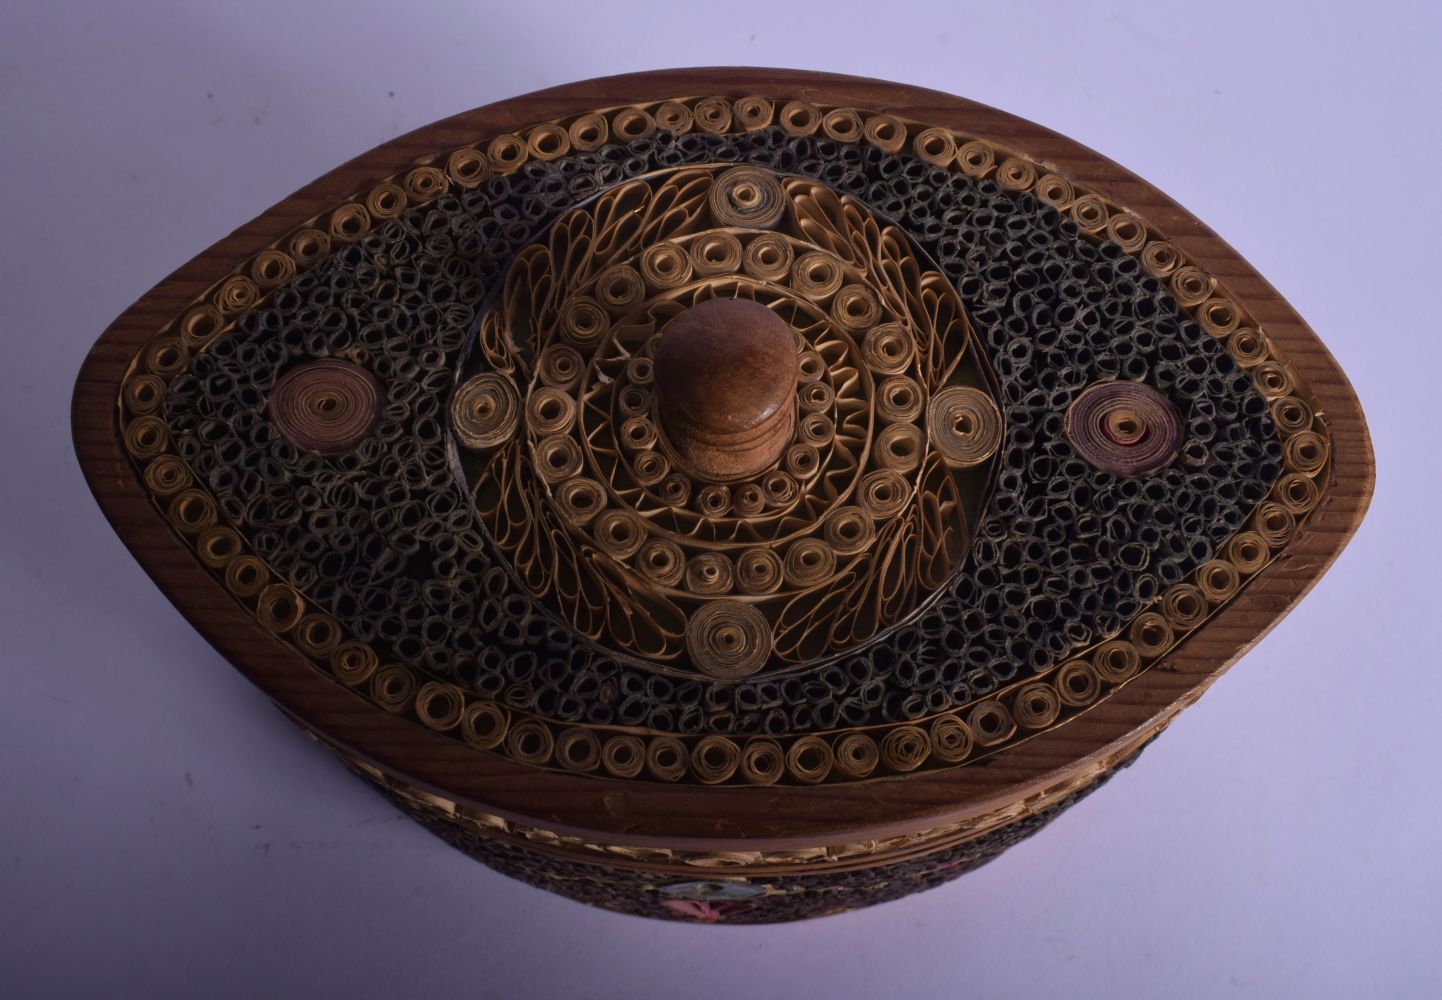 A RARE ANTIQUE ENGLISH ROLLED PAPER OVAL TEA CADDY decorated all over with motifs, internally inset - Image 3 of 5